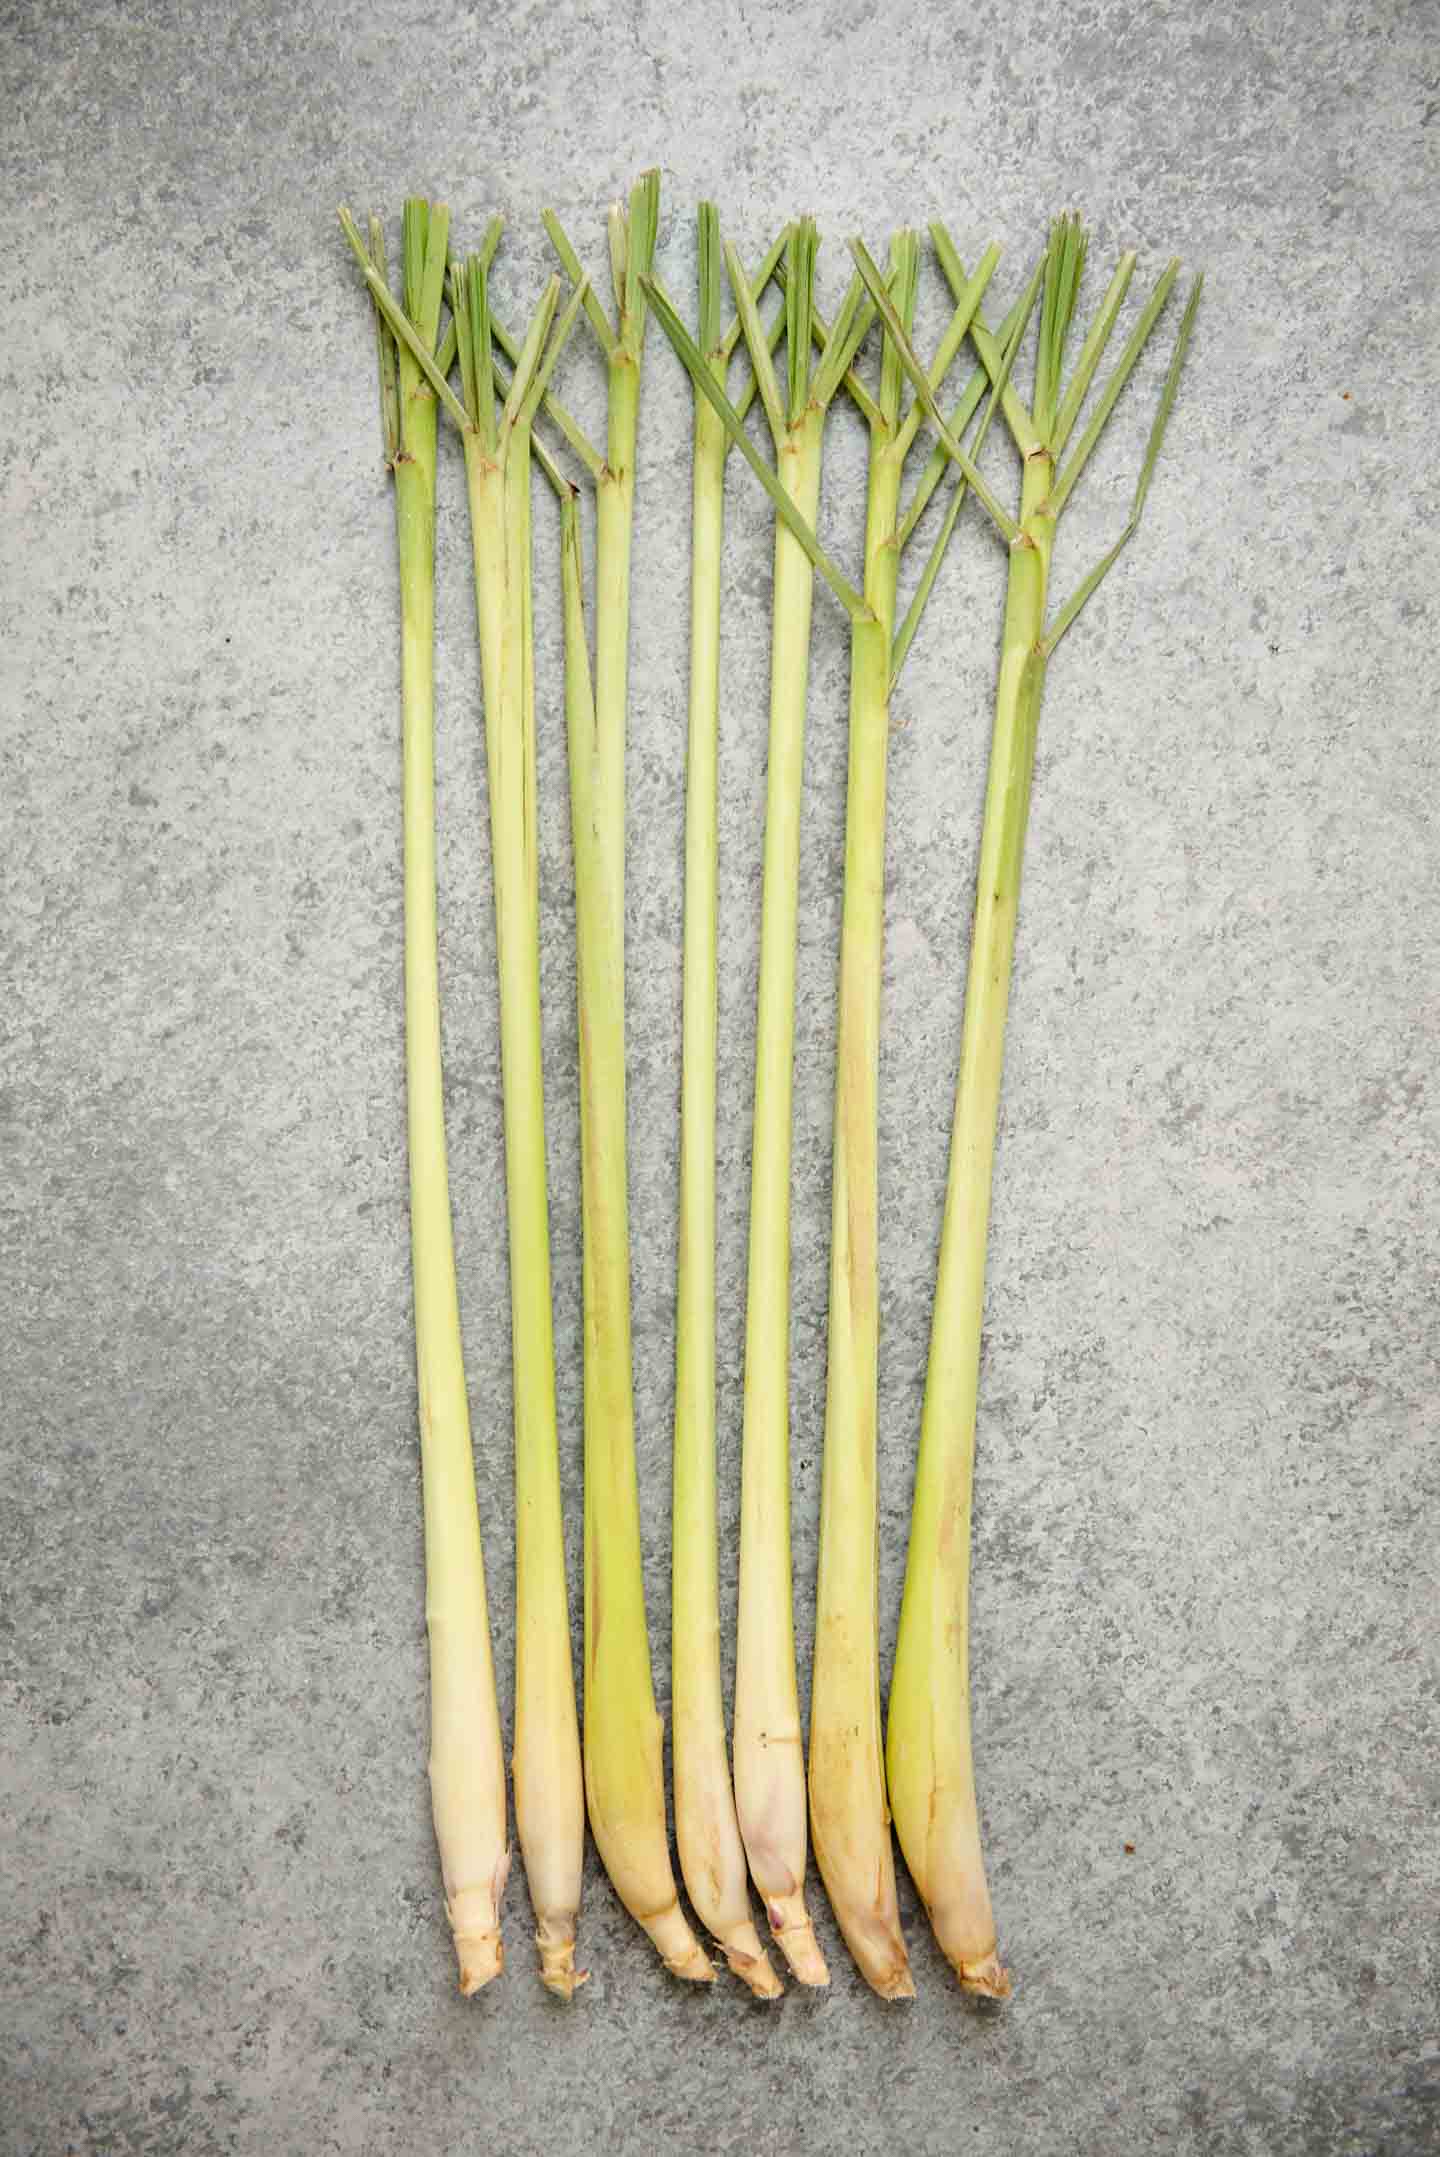 How to Cook With Lemongrass